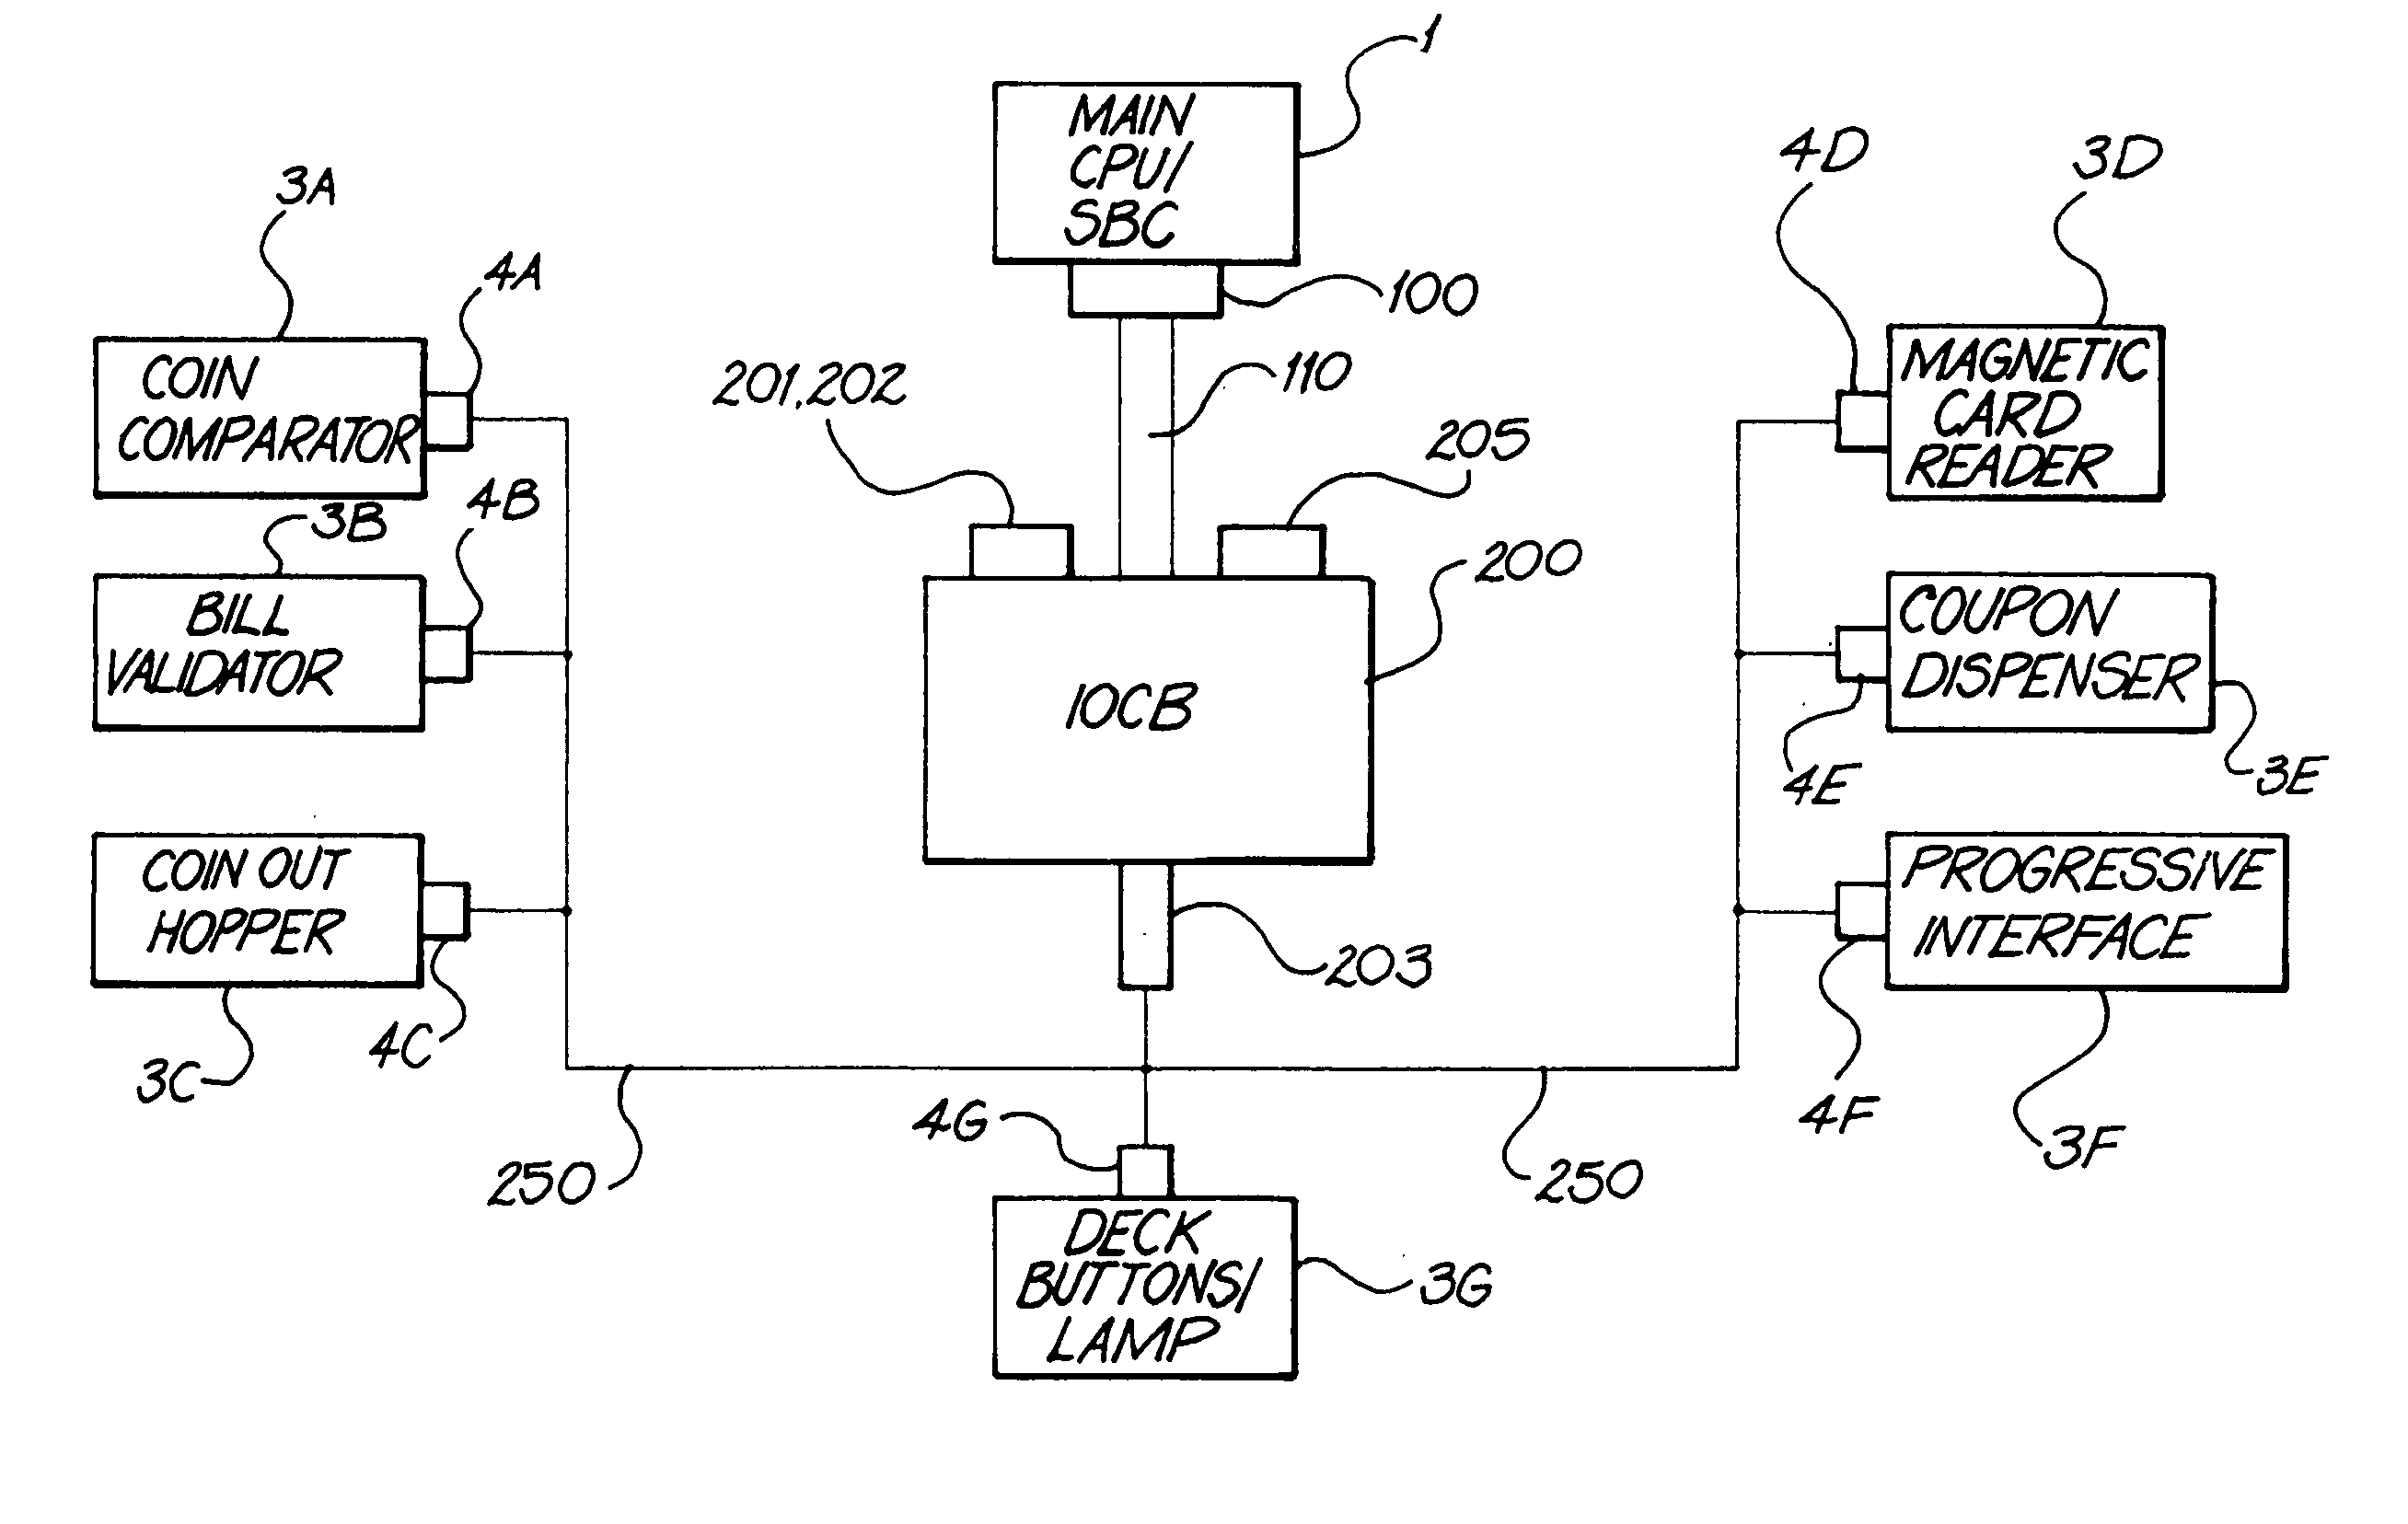 Secured inter-processor and virtual device communications system